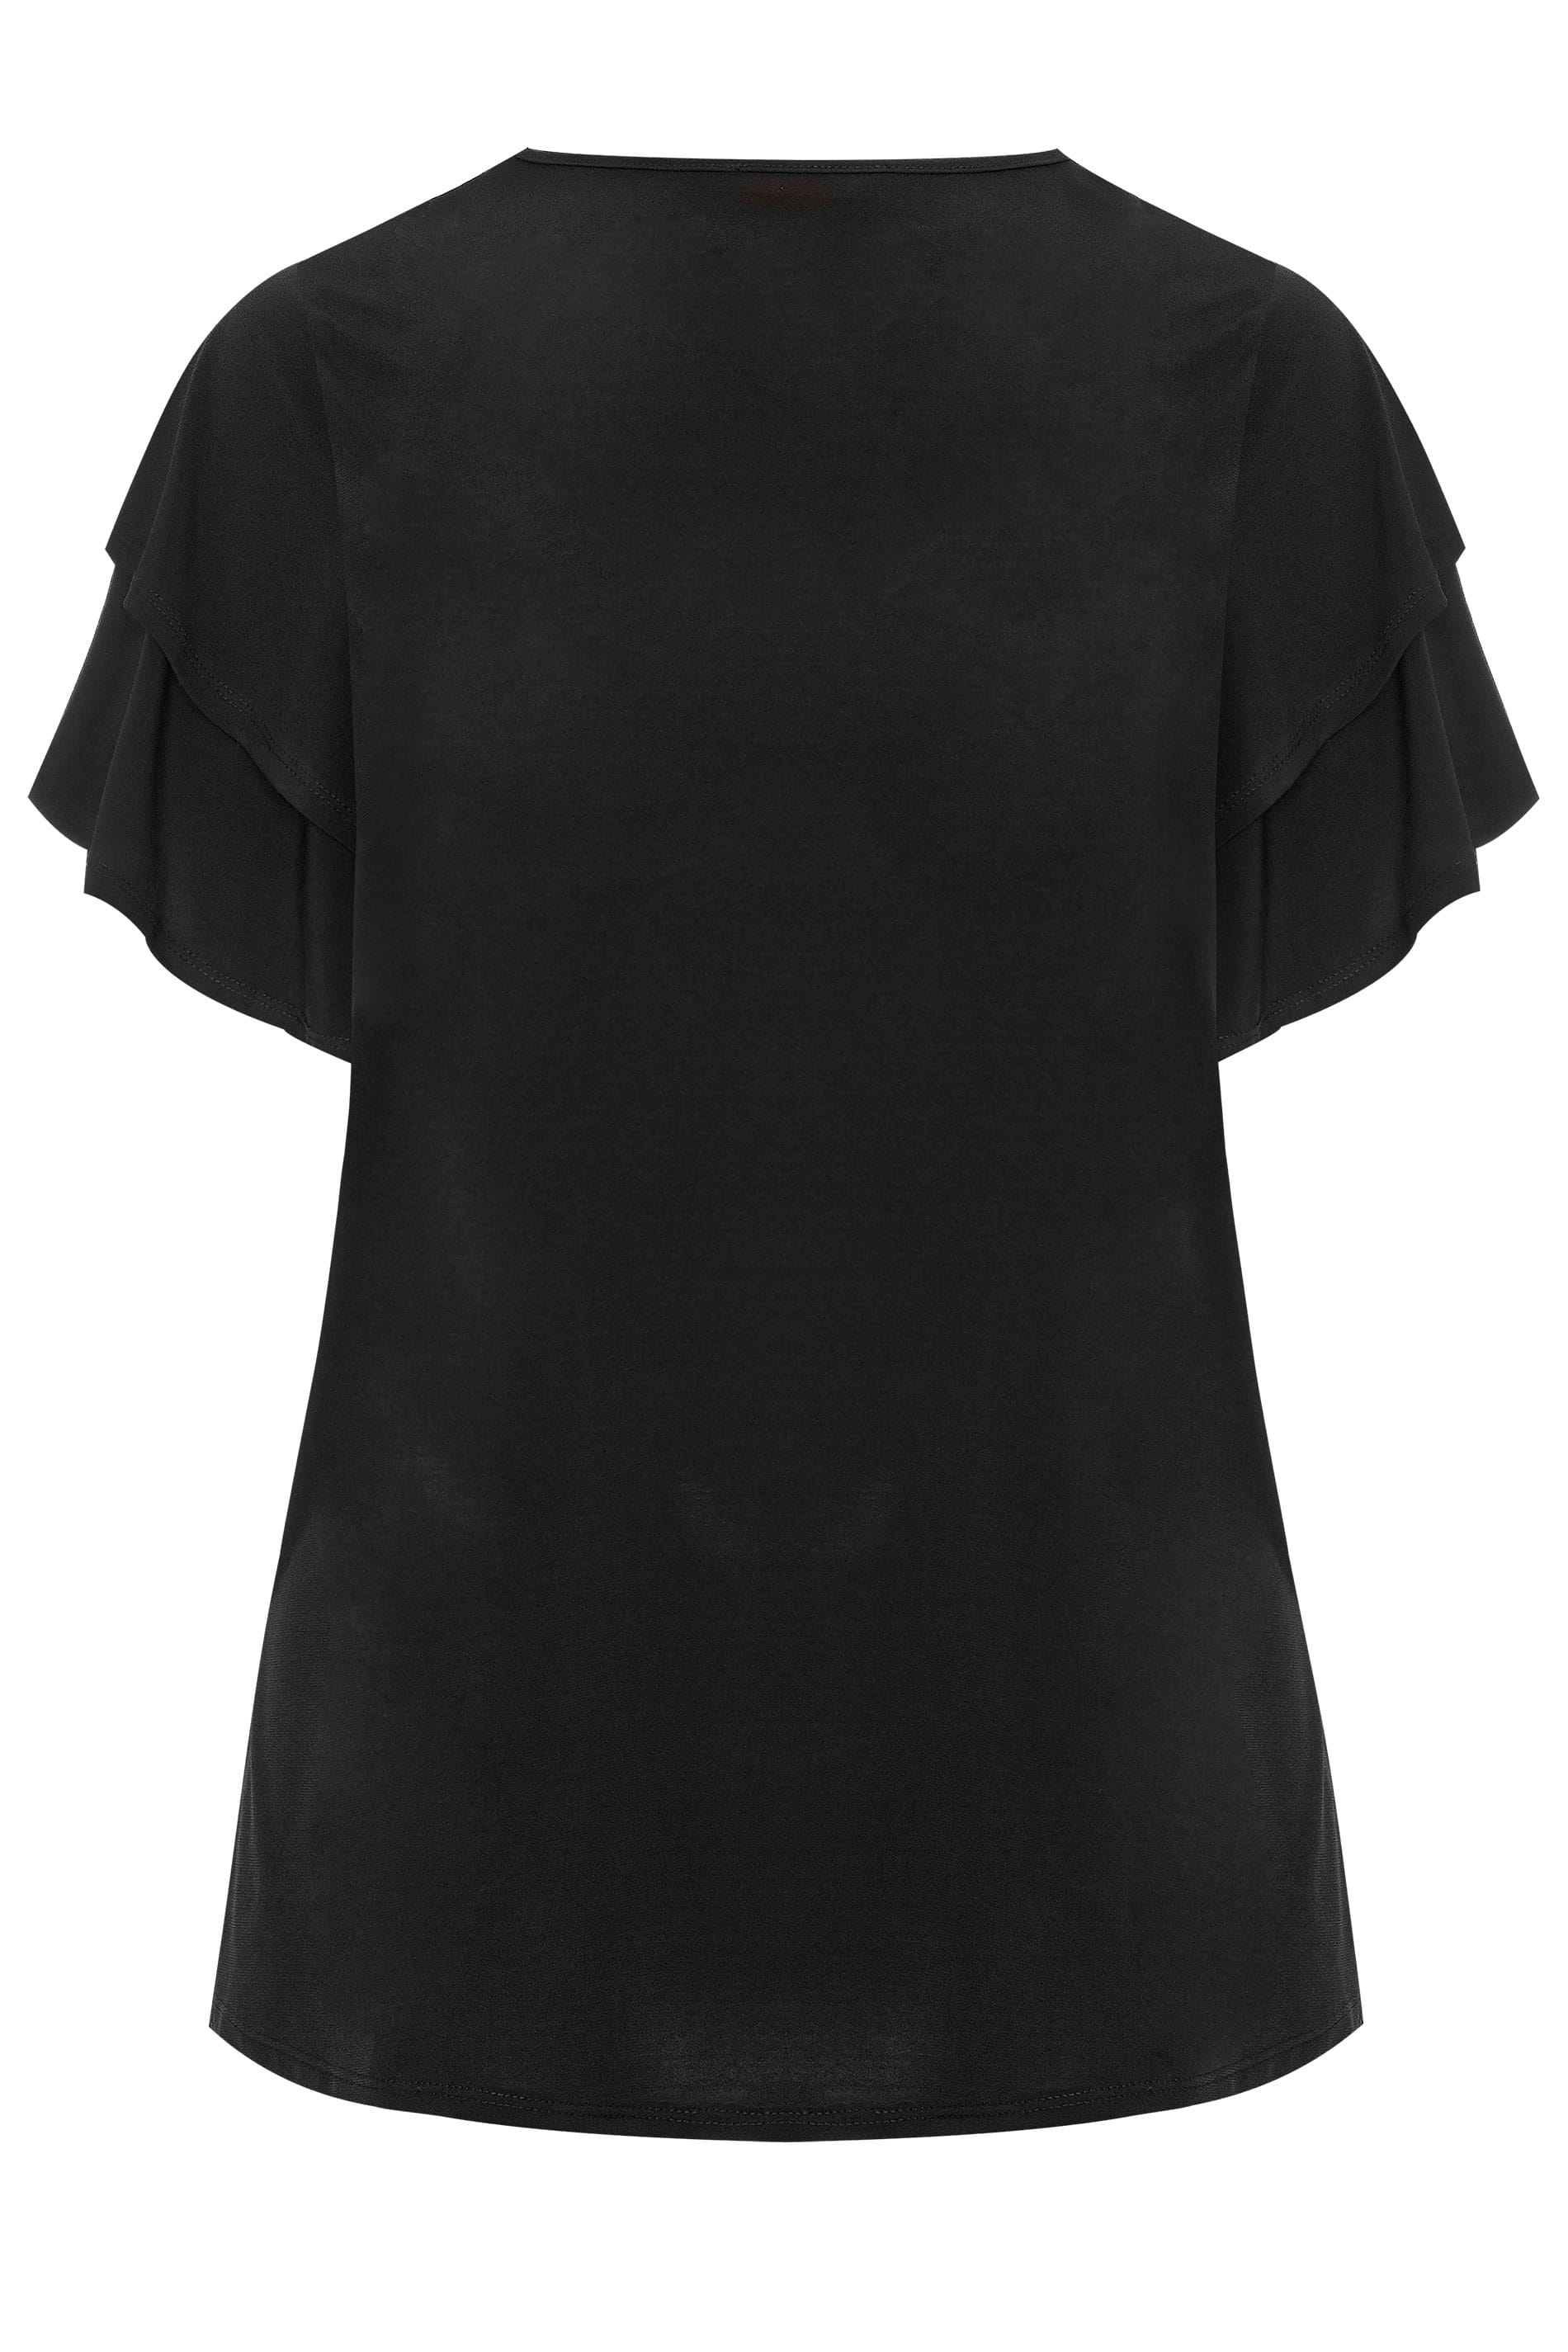 LIMITED COLLECTION Black Flared Angel Sleeve Top | Yours Clothing